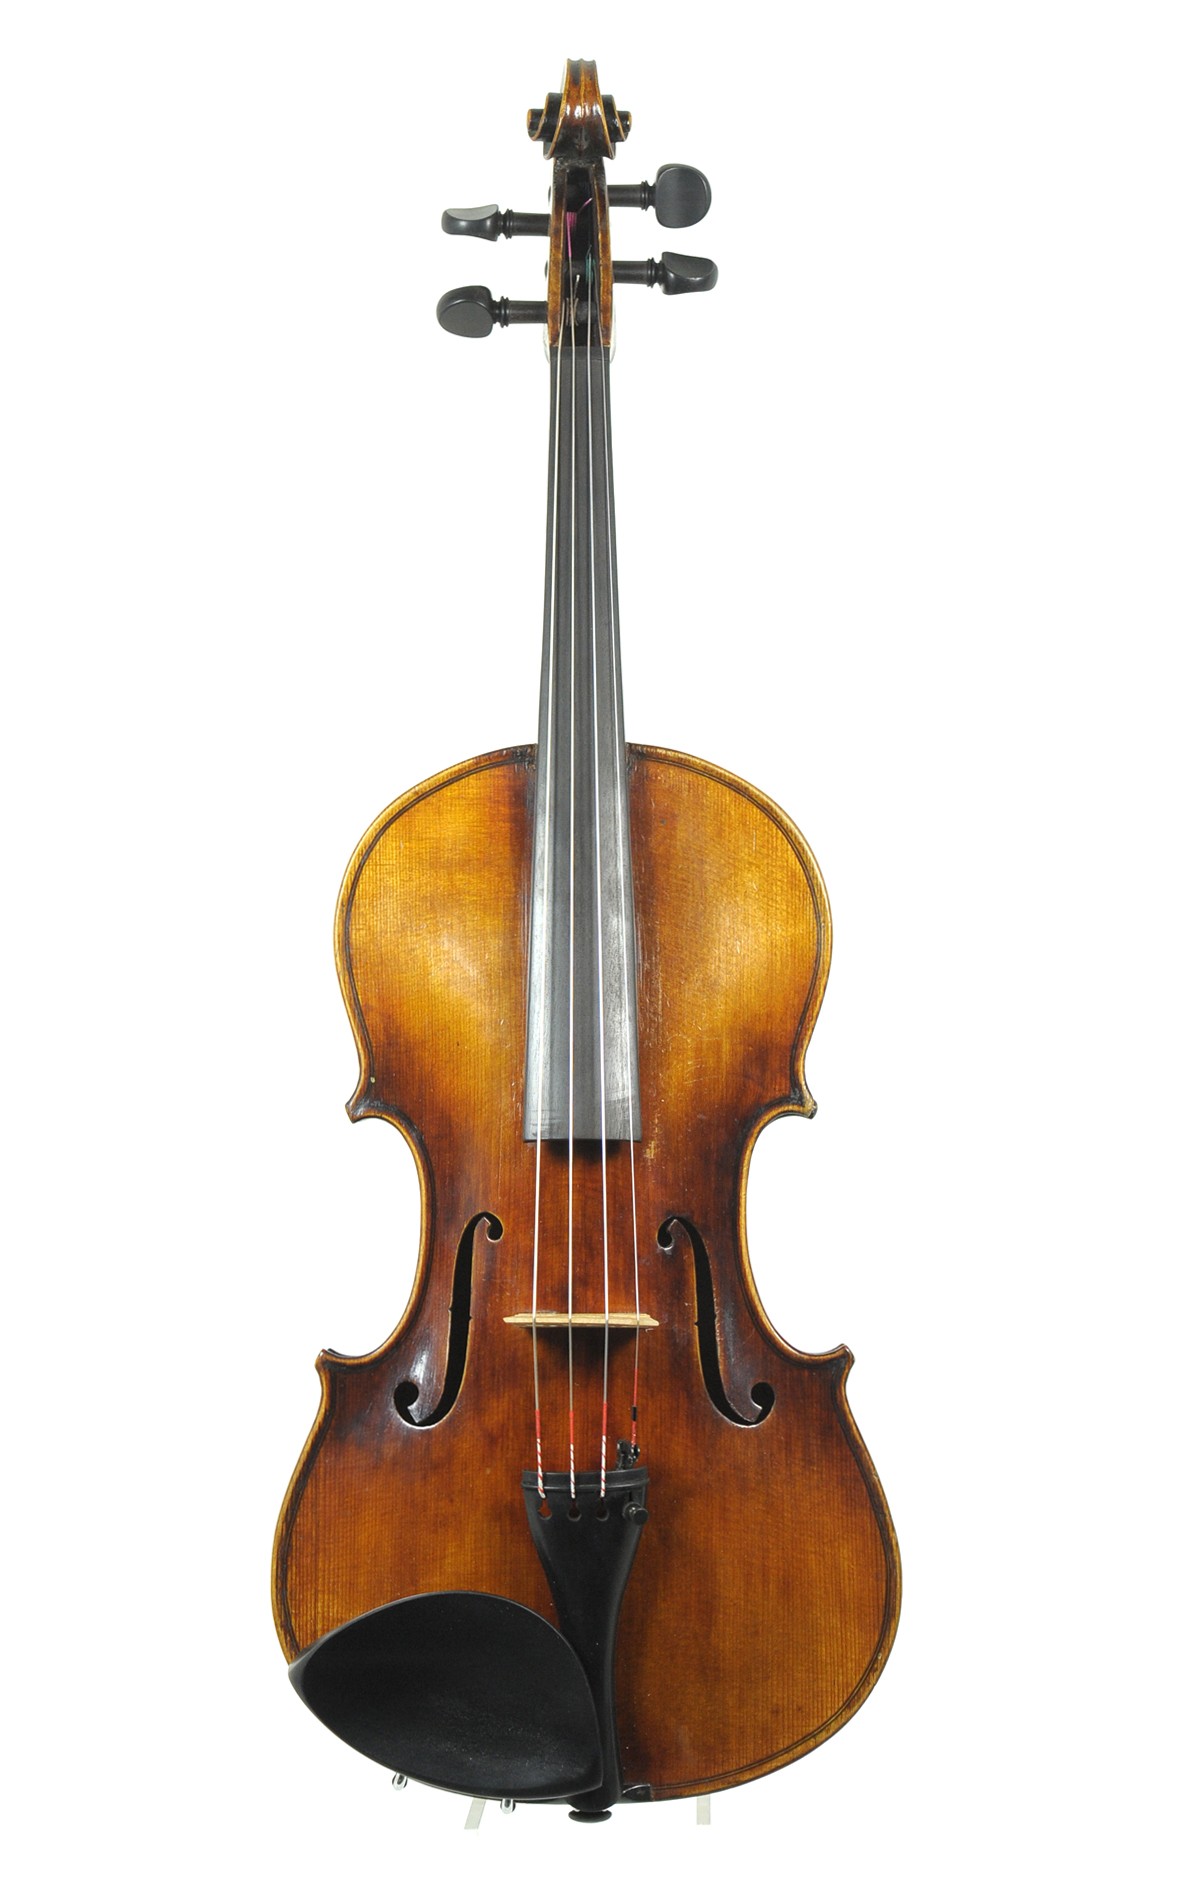 Quality violin from Saxony - top view